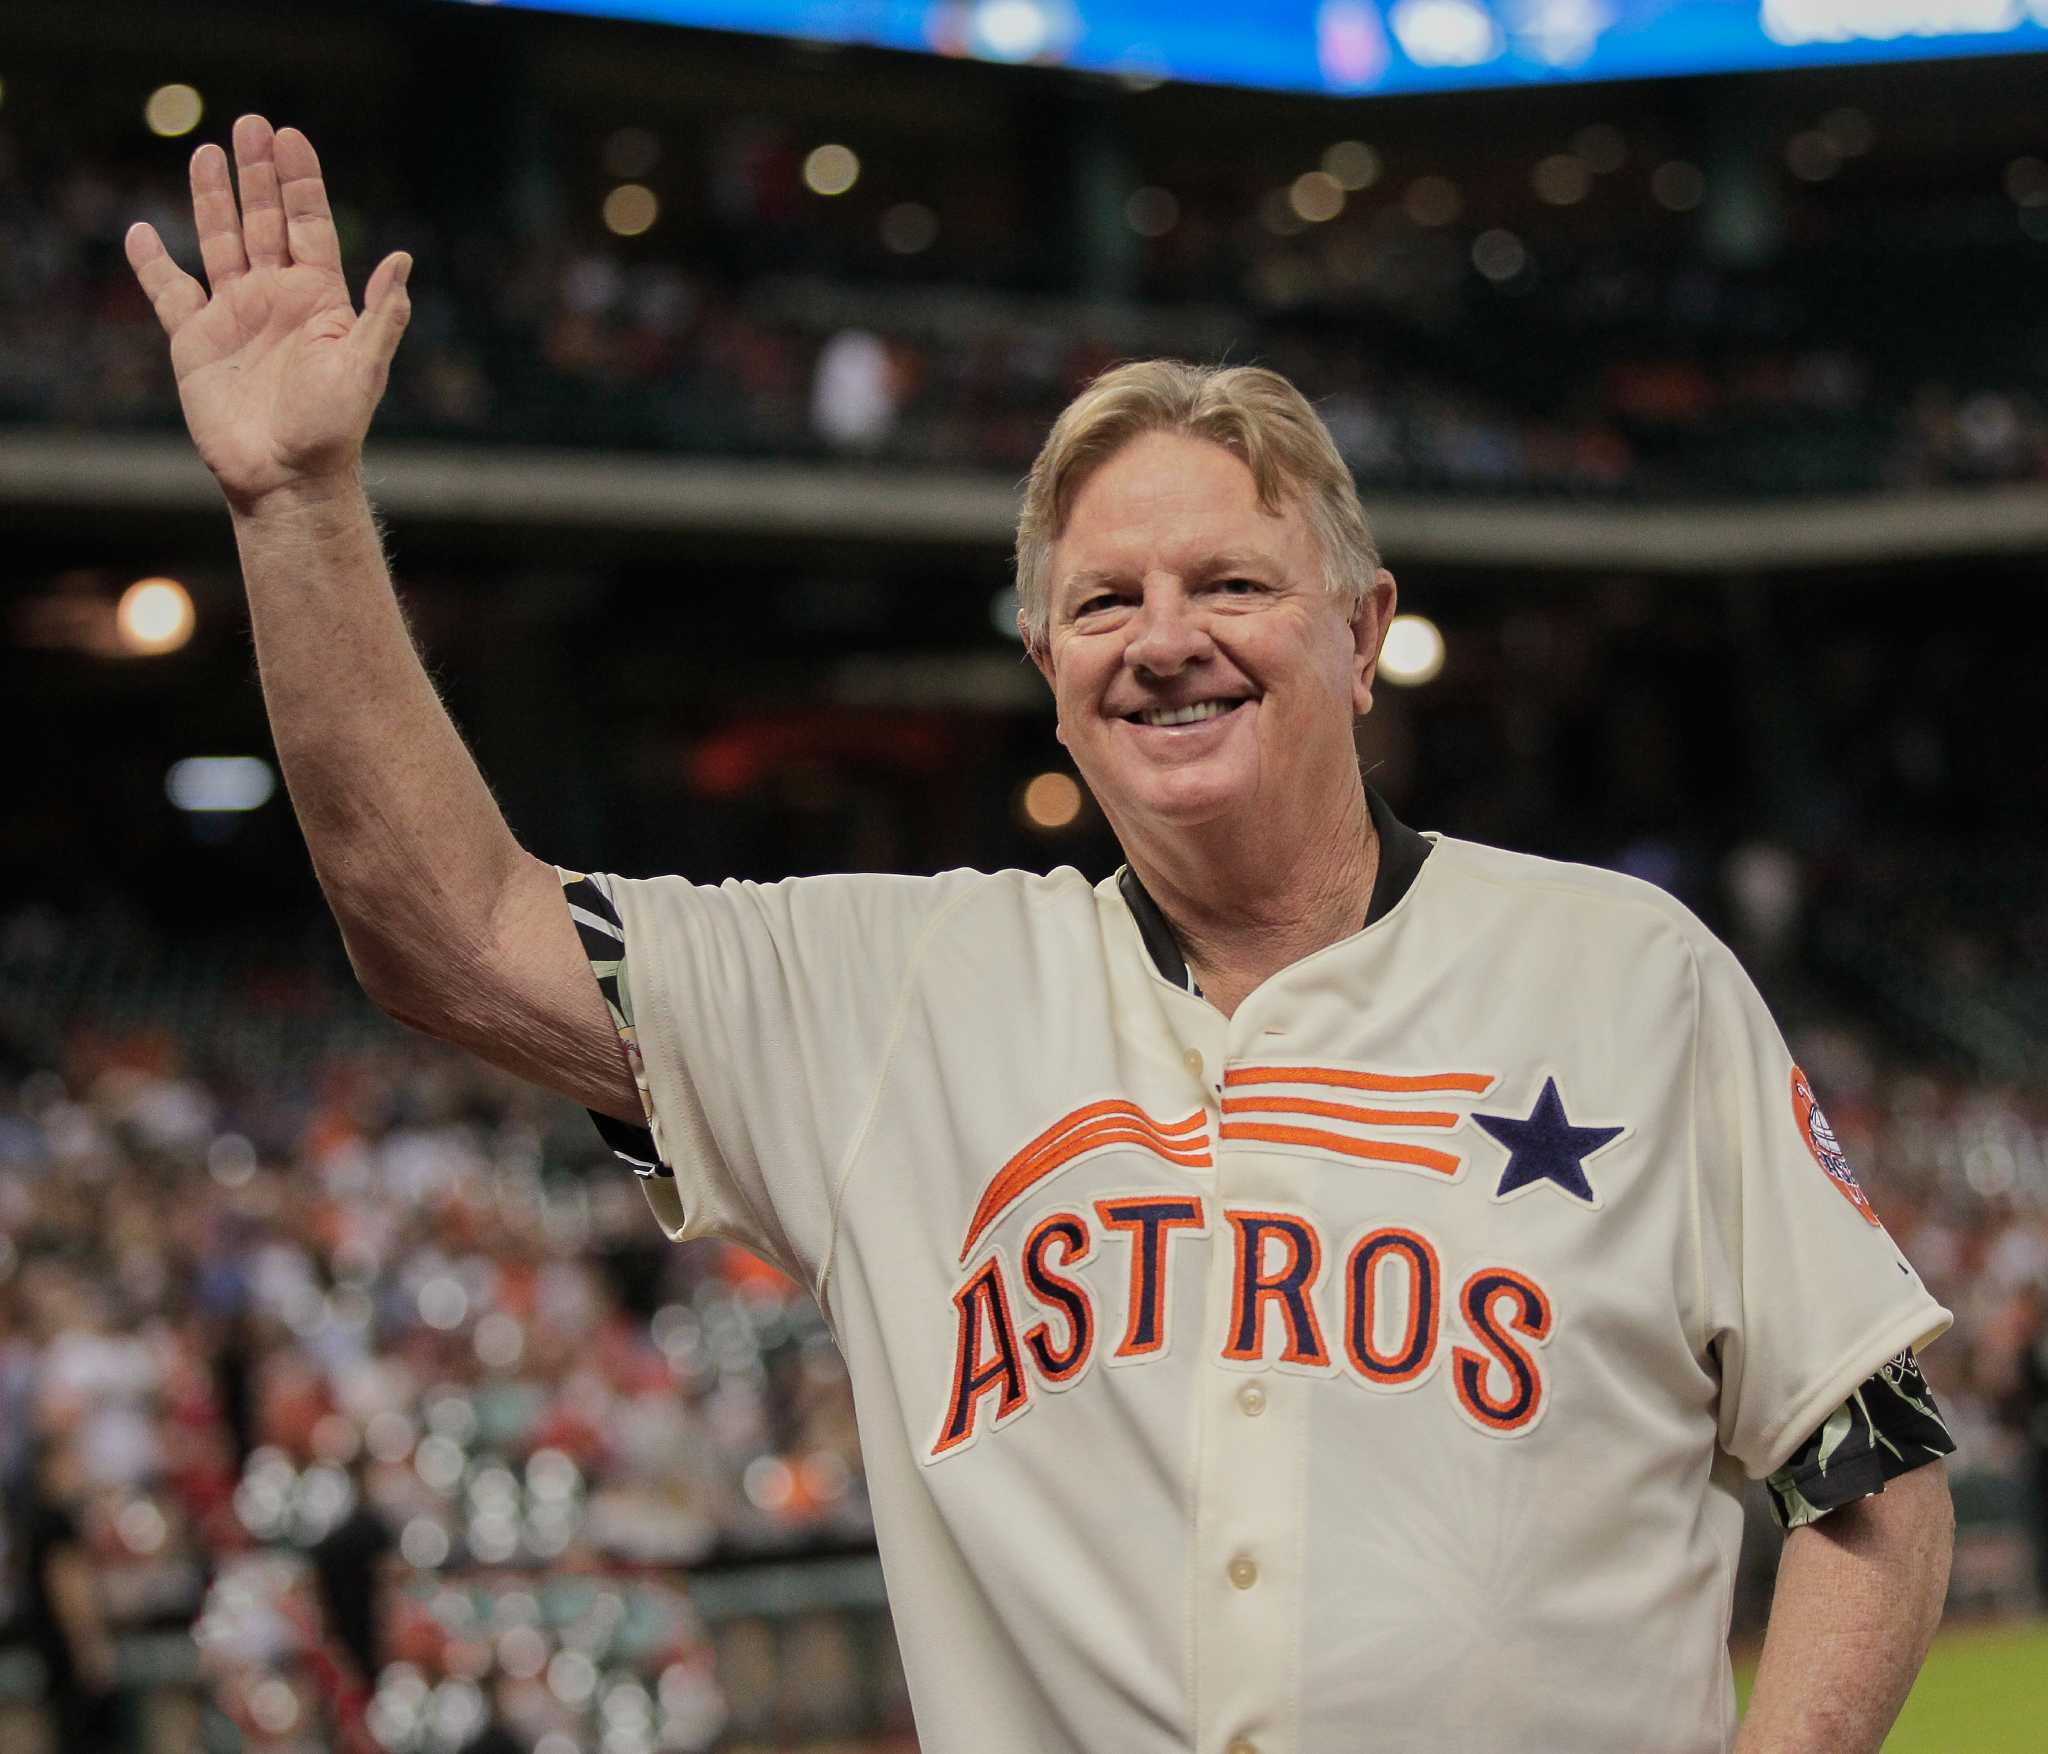 A day to celebrate Astros' stars from the past